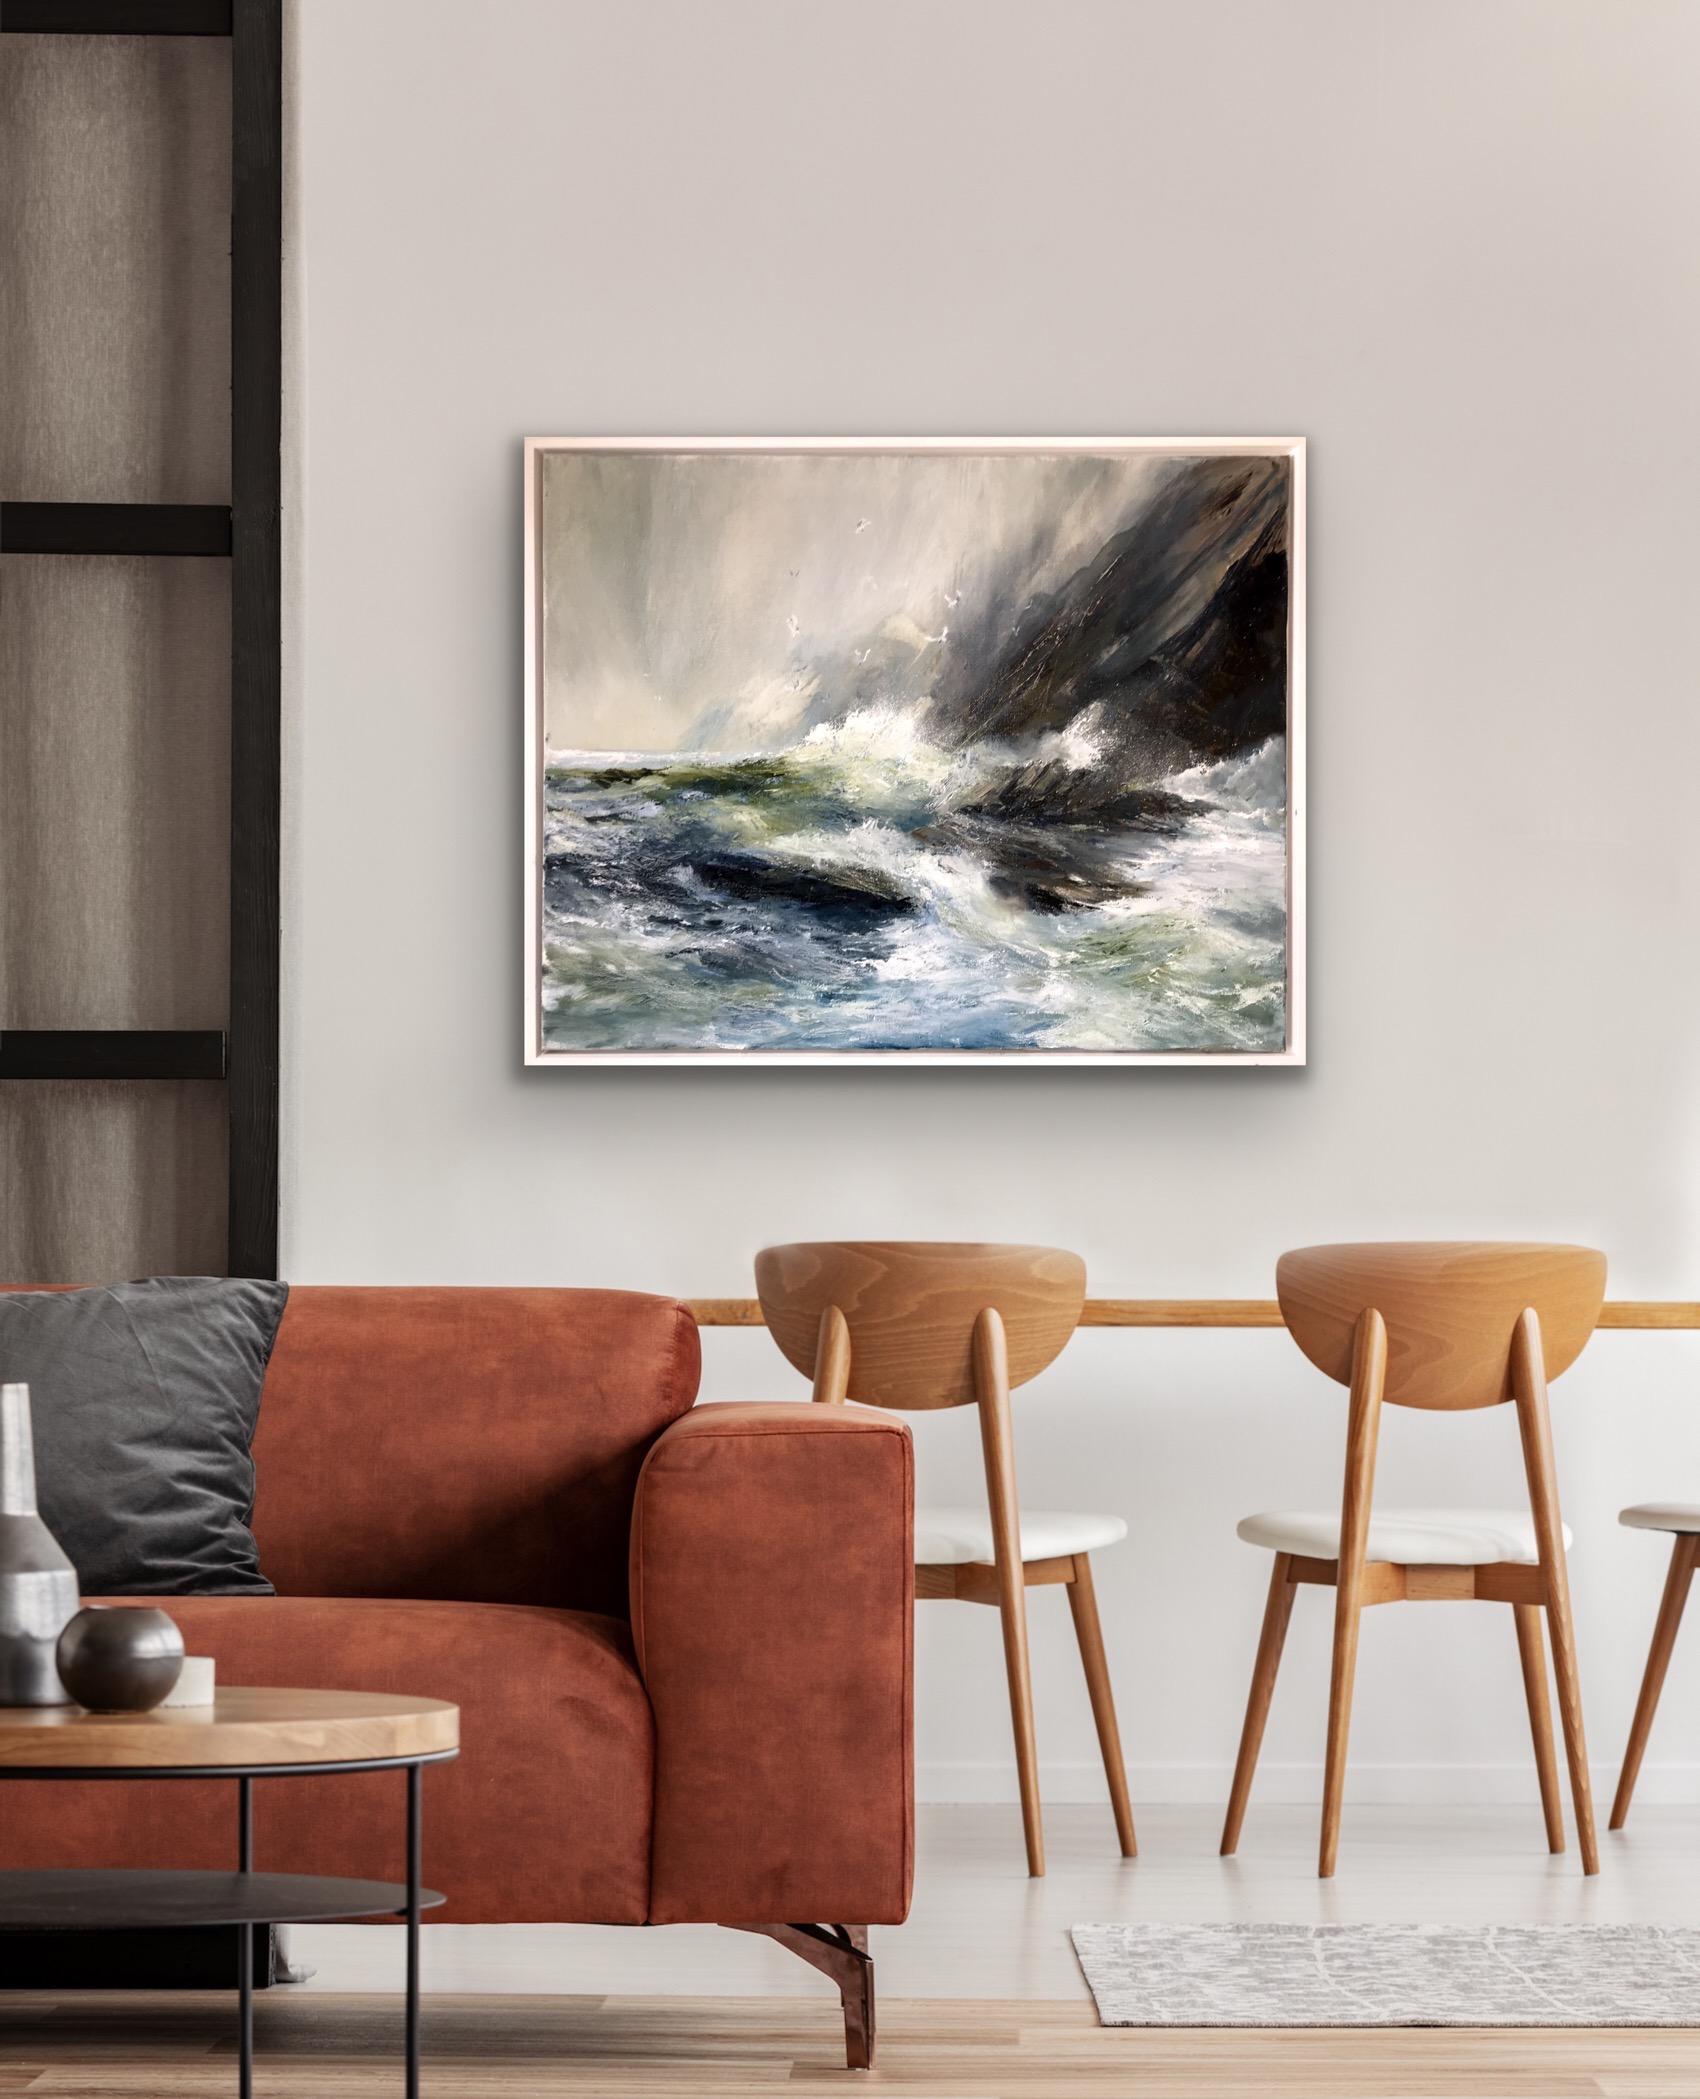 What Lies Beneath the Salt is Fiction, Original painting, Seascape, Stormy Sea - Painting by Kim Pragnell